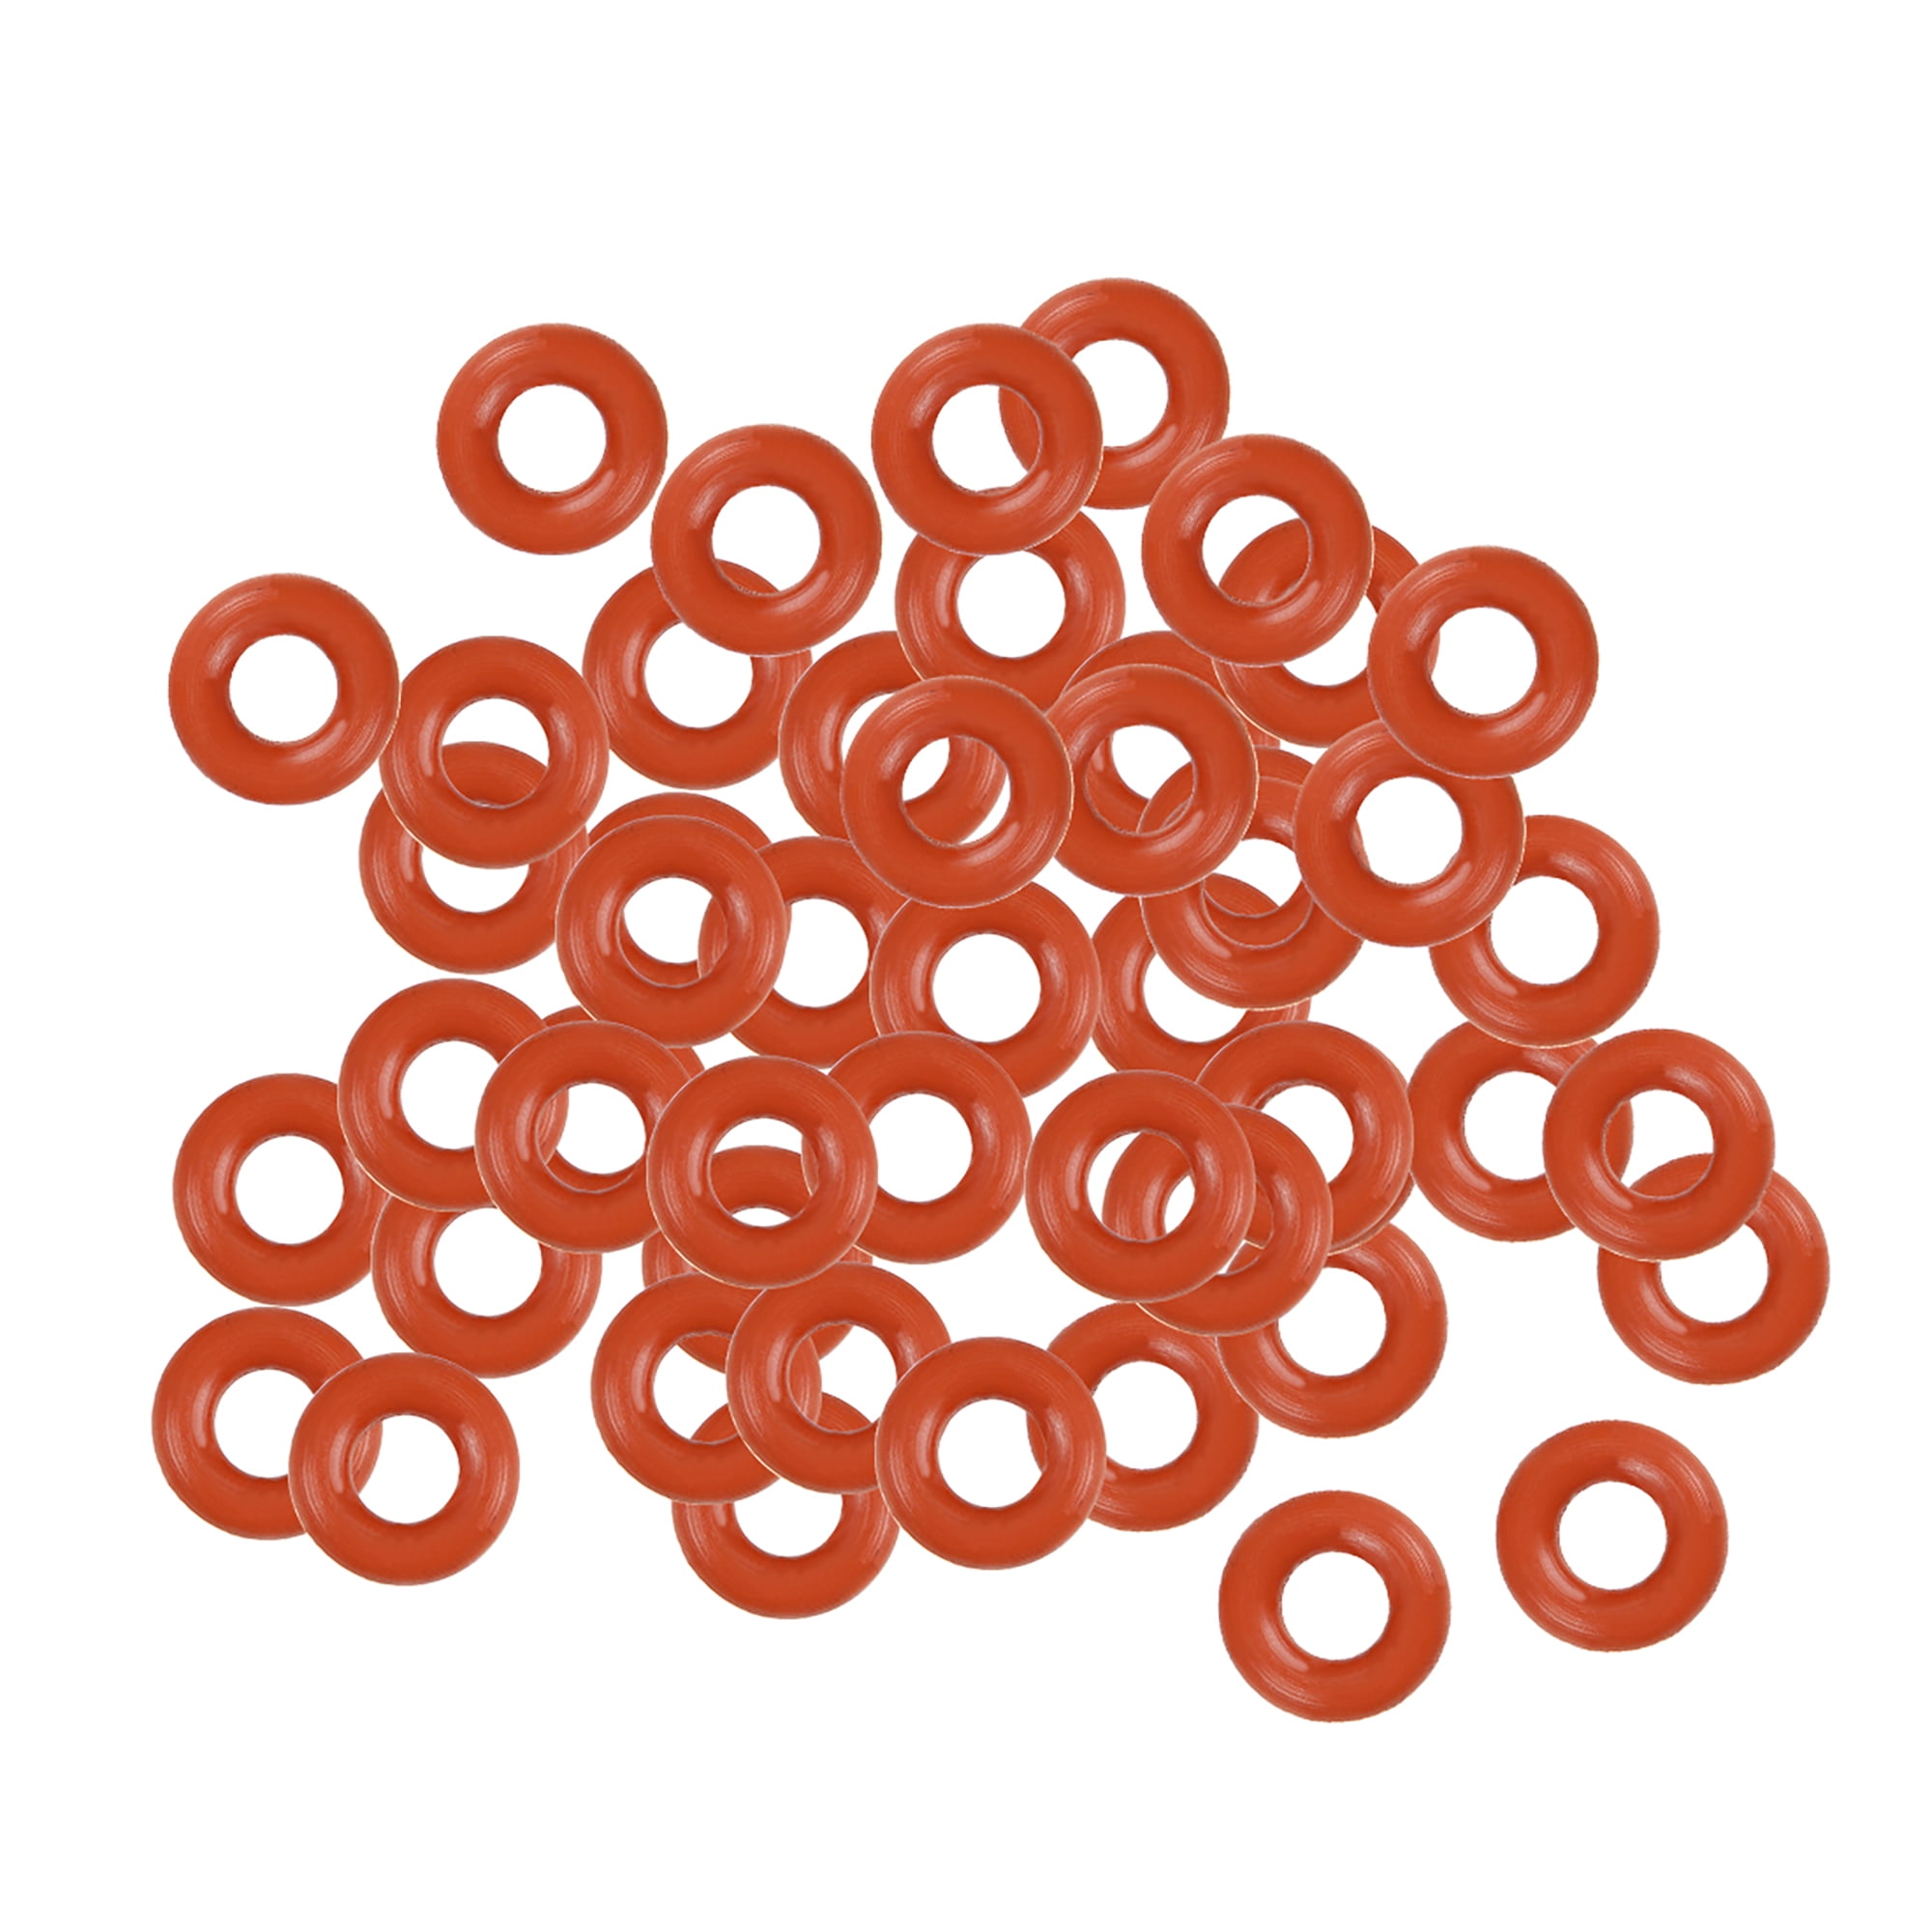 Silicone O-rings 28 x 2.5mm Price for 5 pcs 